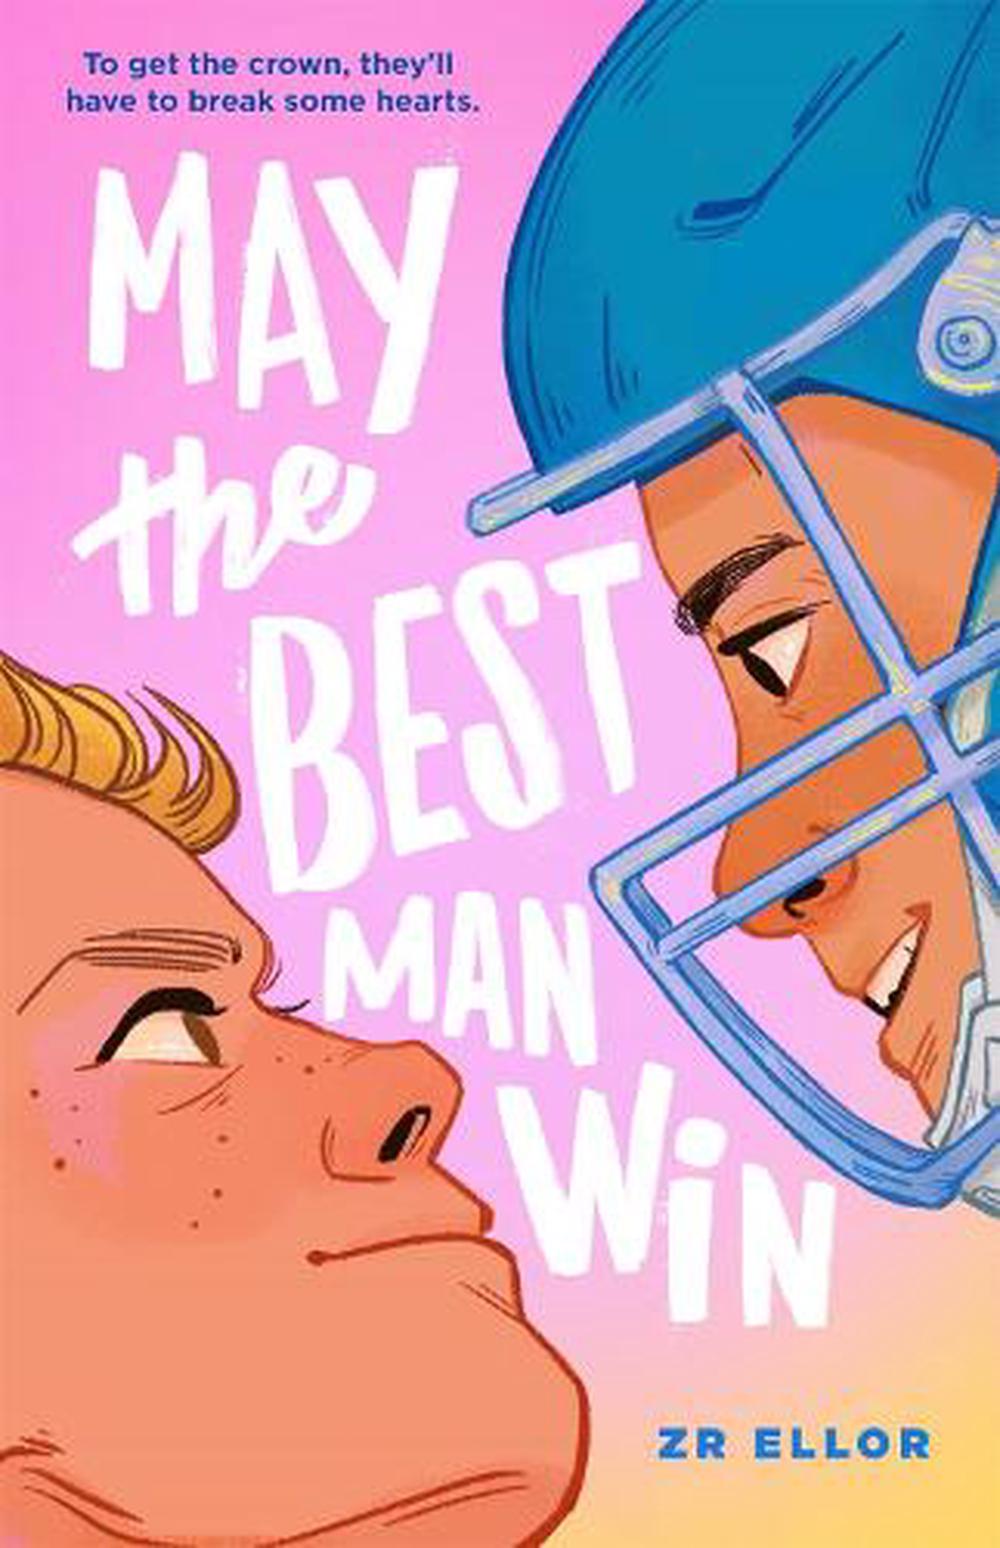 May The Best Man Win